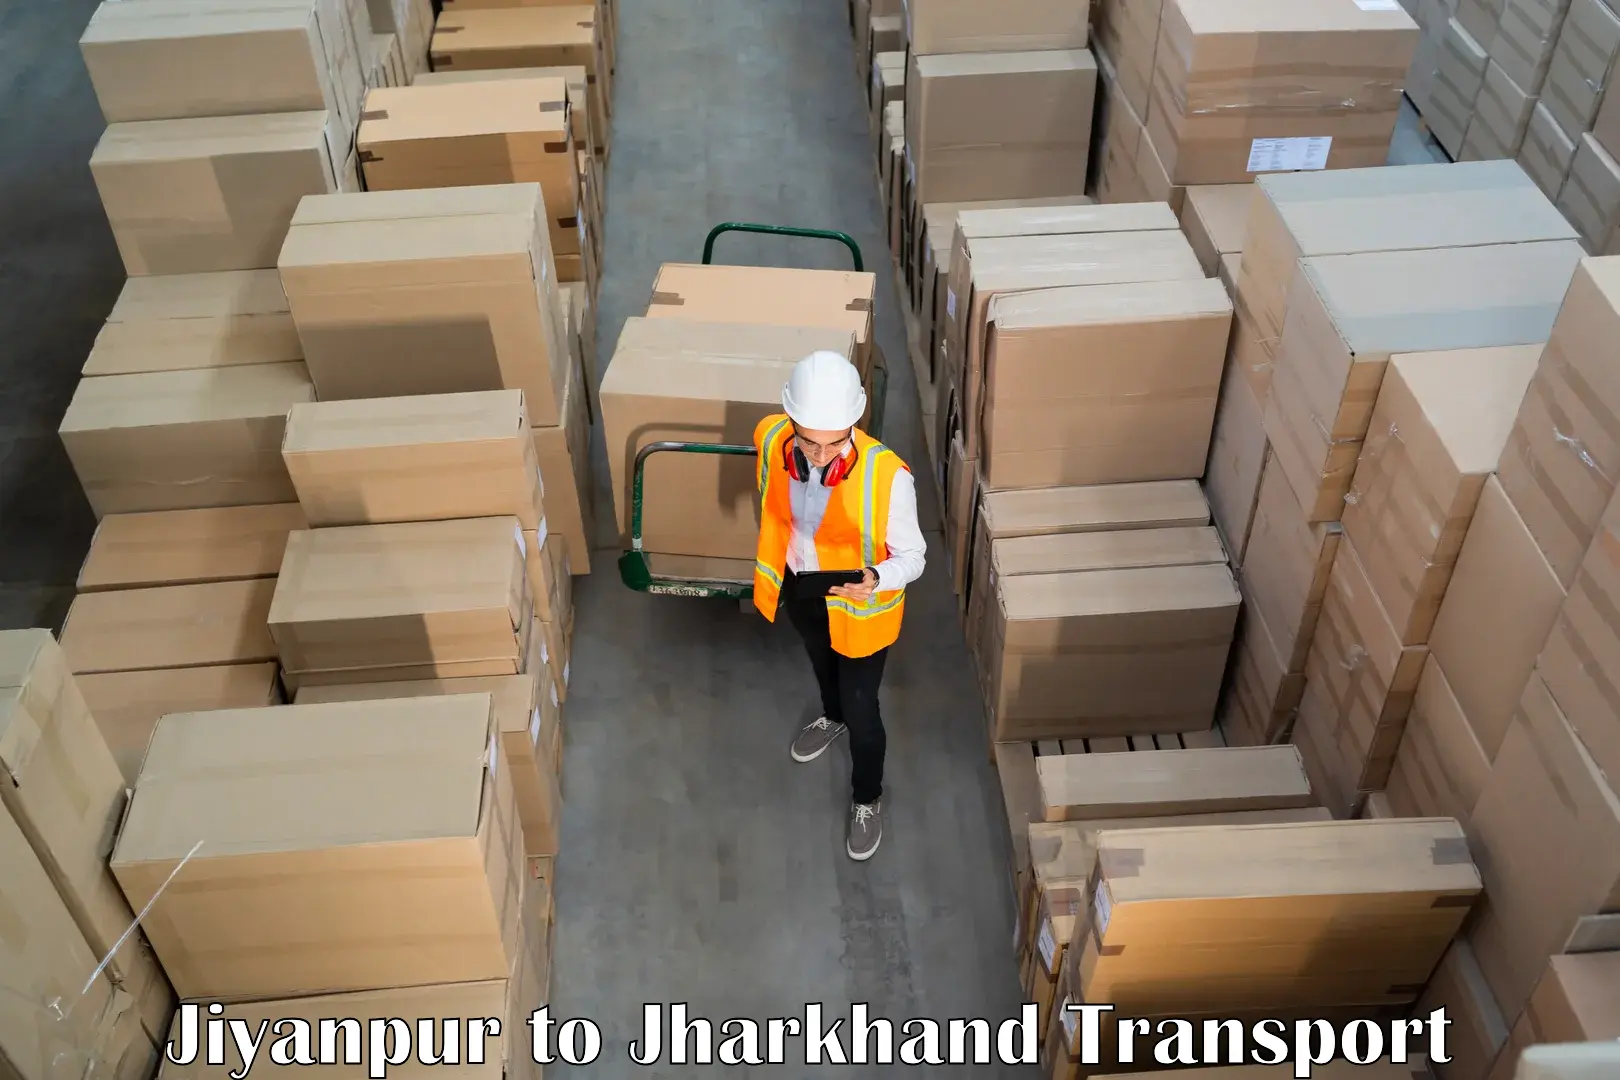 India truck logistics services Jiyanpur to Dhanbad